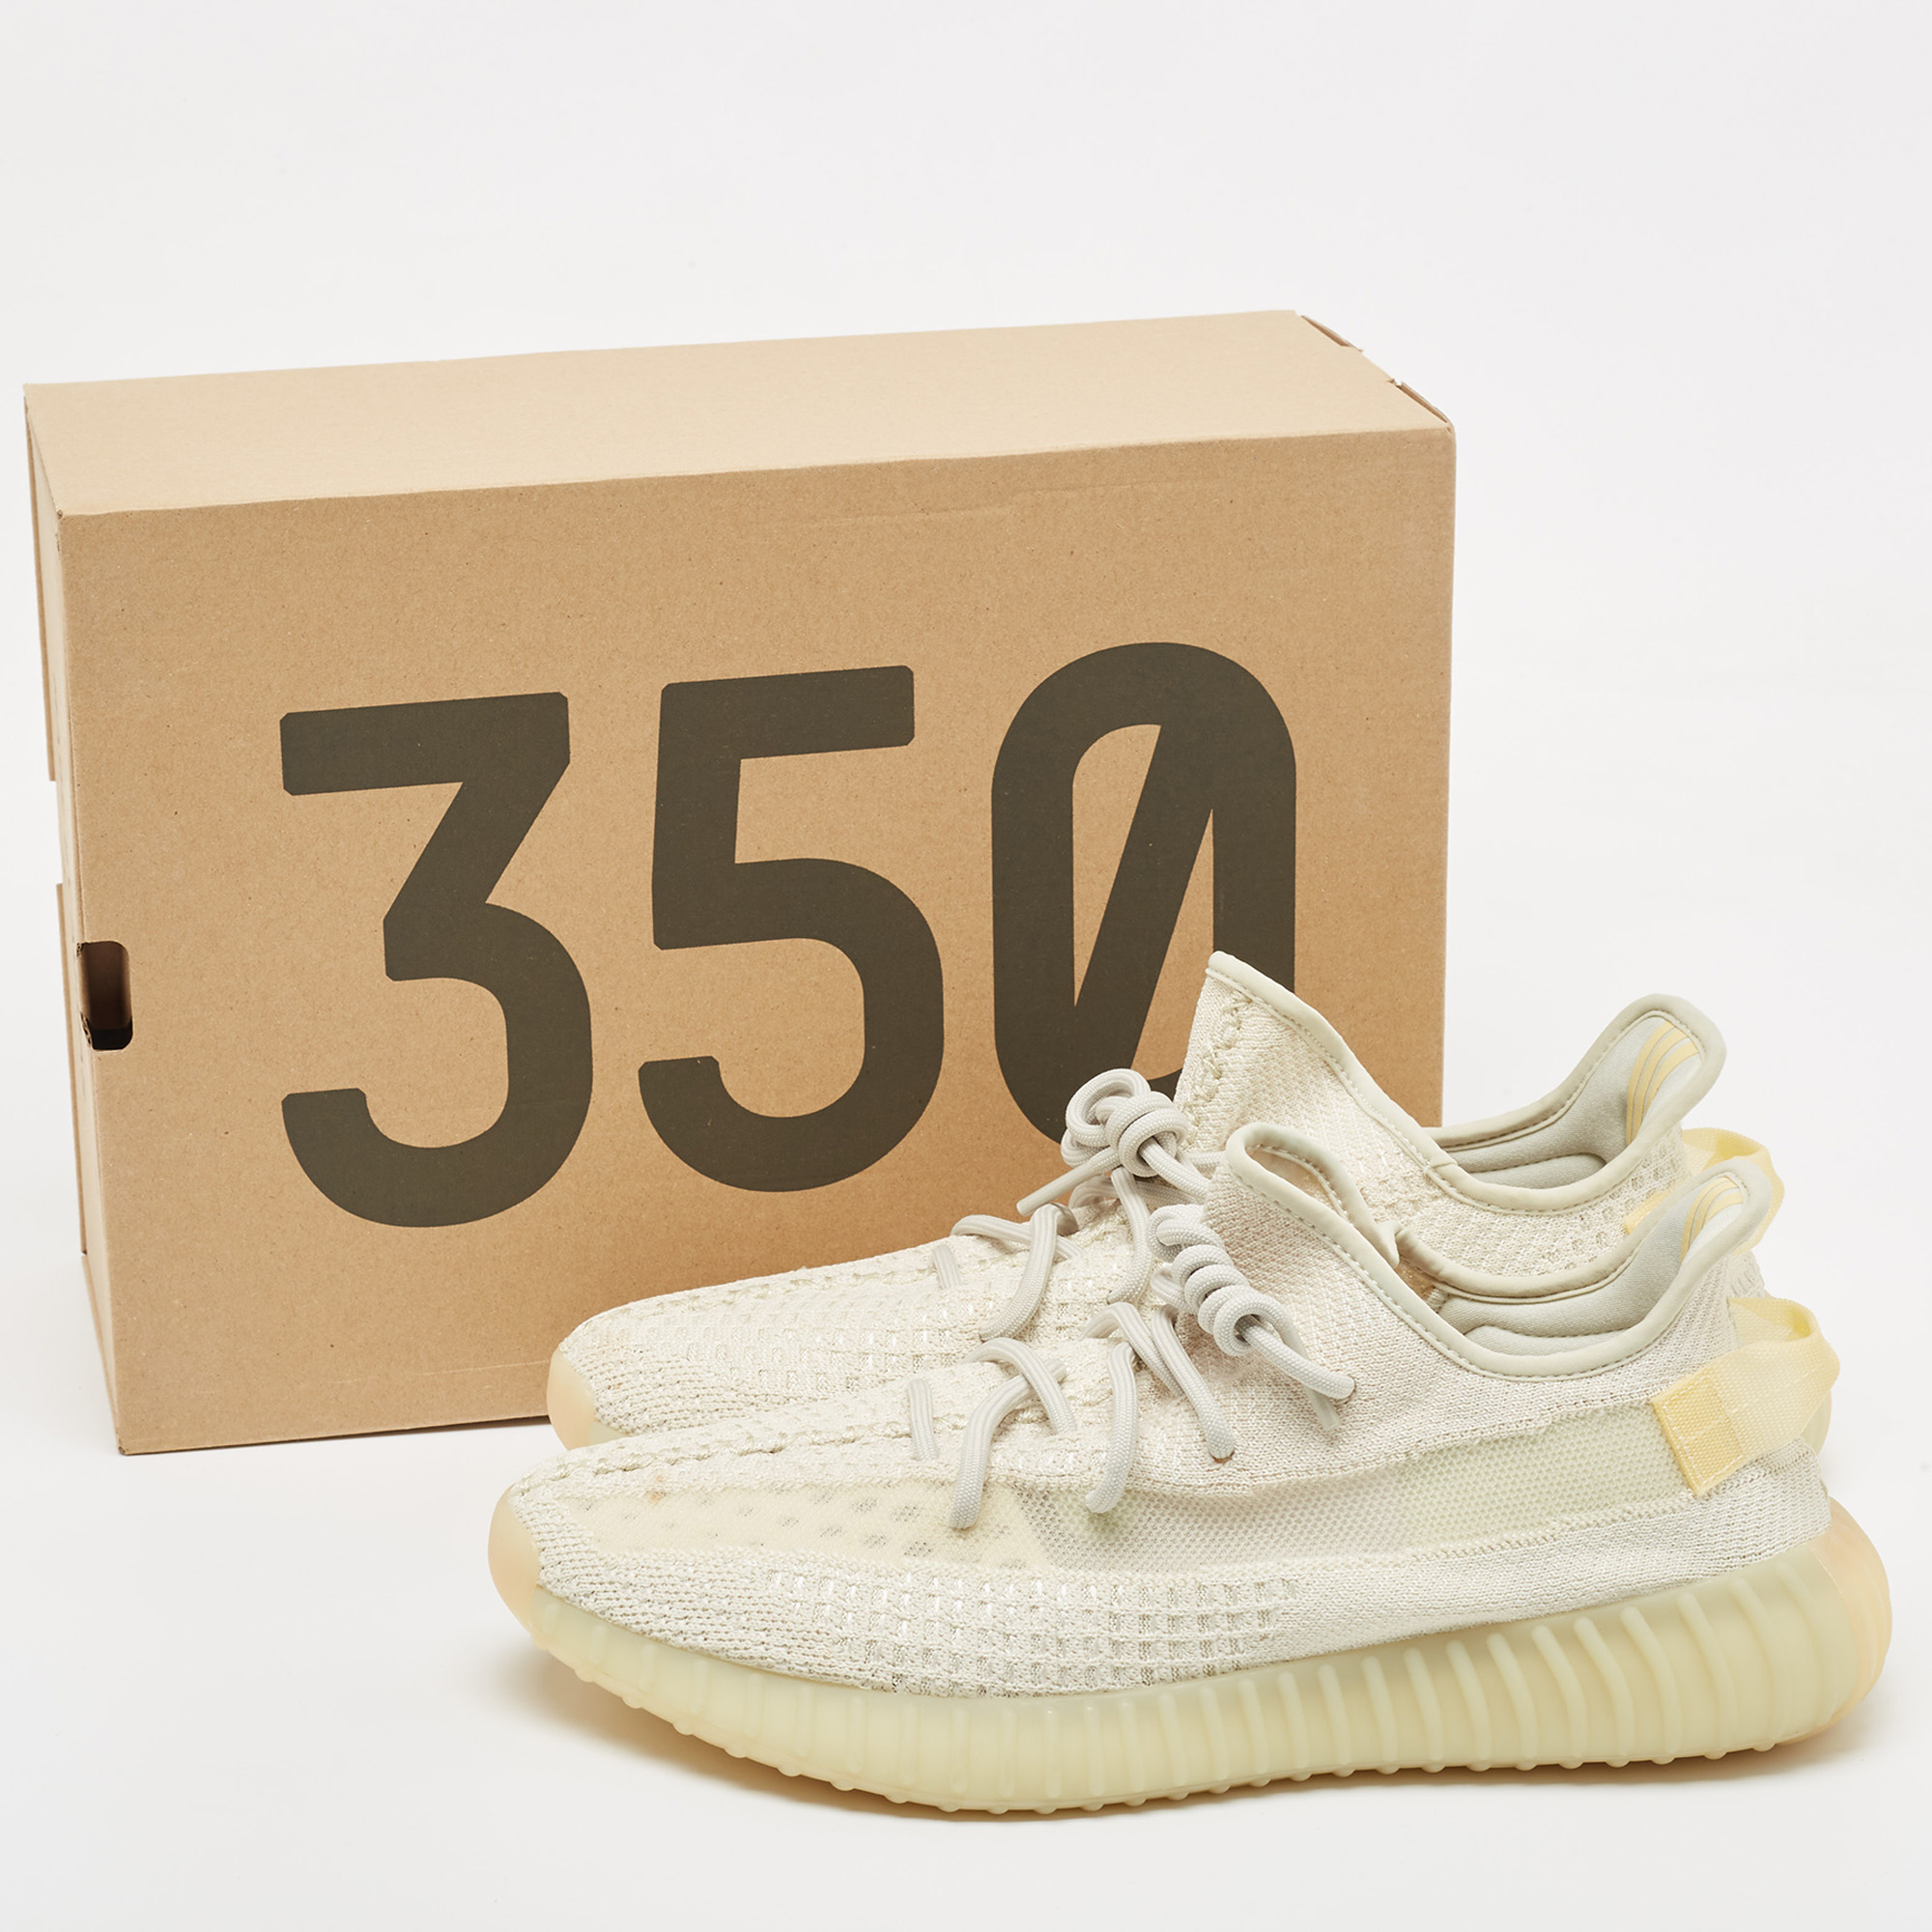 Yeezy X Adidas White Knit Fabric Boost 350 V2 Light Sneakers Size 47 1/3